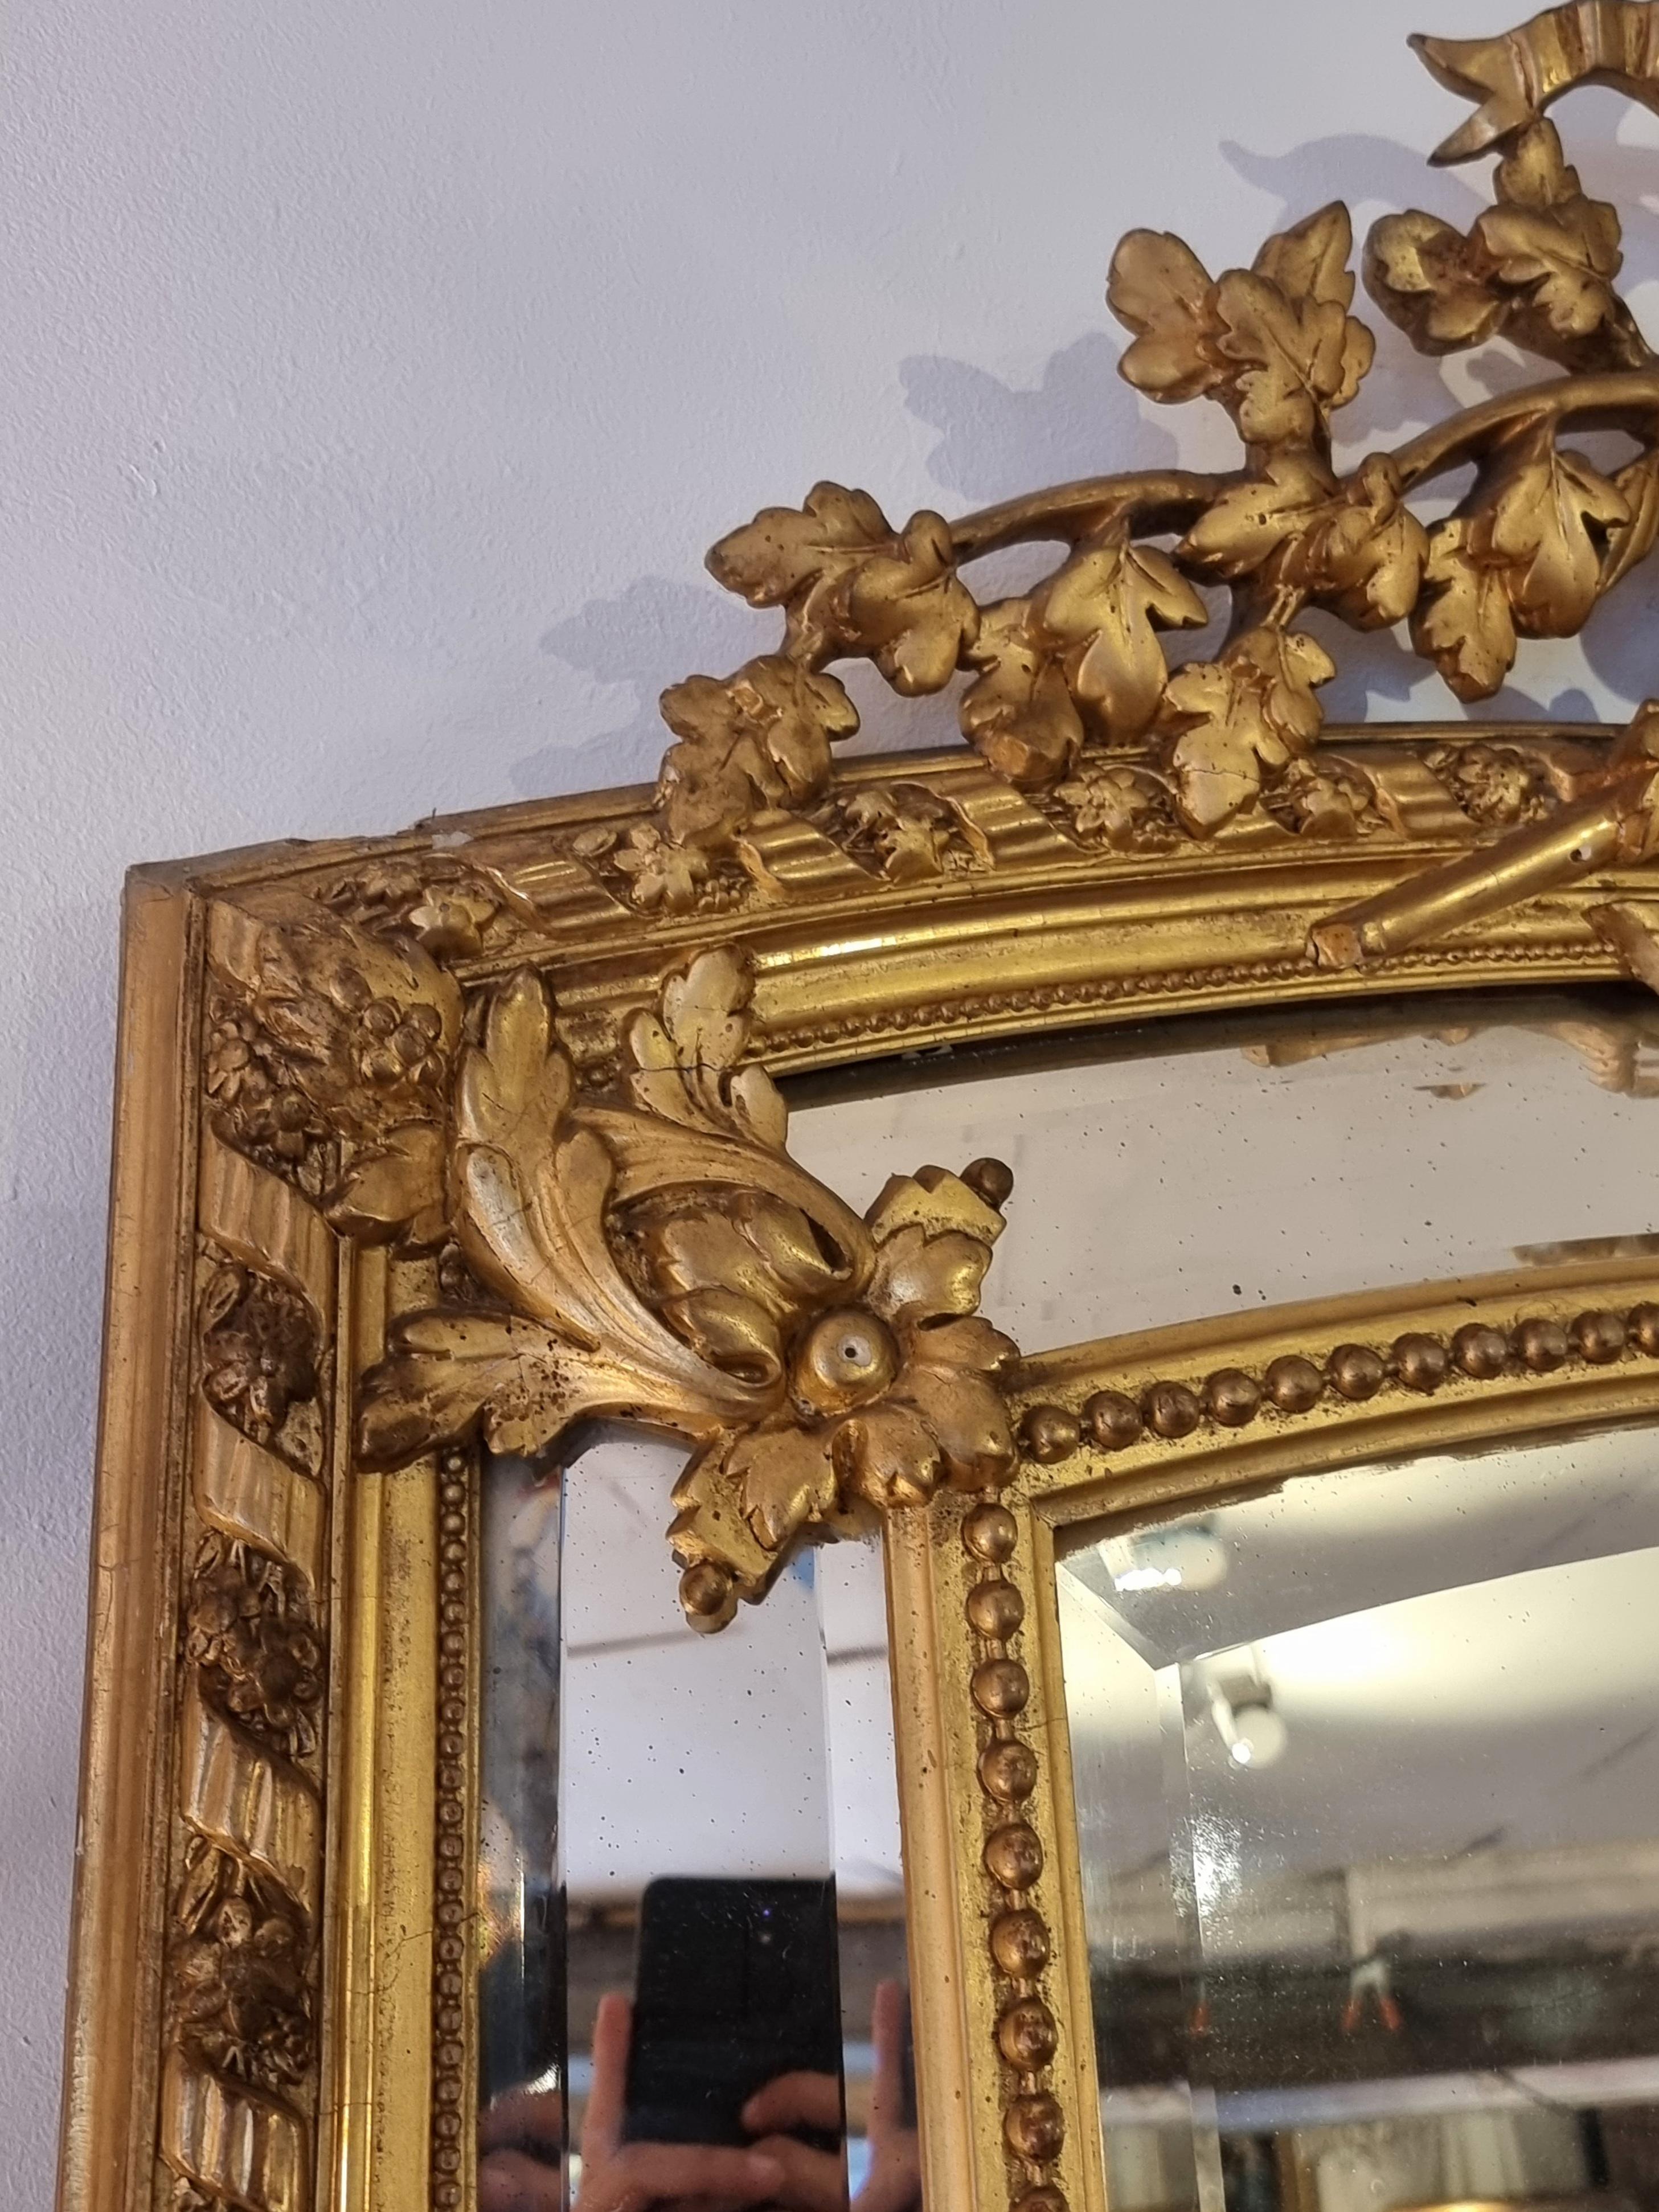 Superb Louis XVI glazing beads mirror from the end of the 18th century. High-quality workmanship with all the mirrors bevelled. The pediment is decorated with dense floral interlacing placed in a wicker basket whose handle is also visible. The